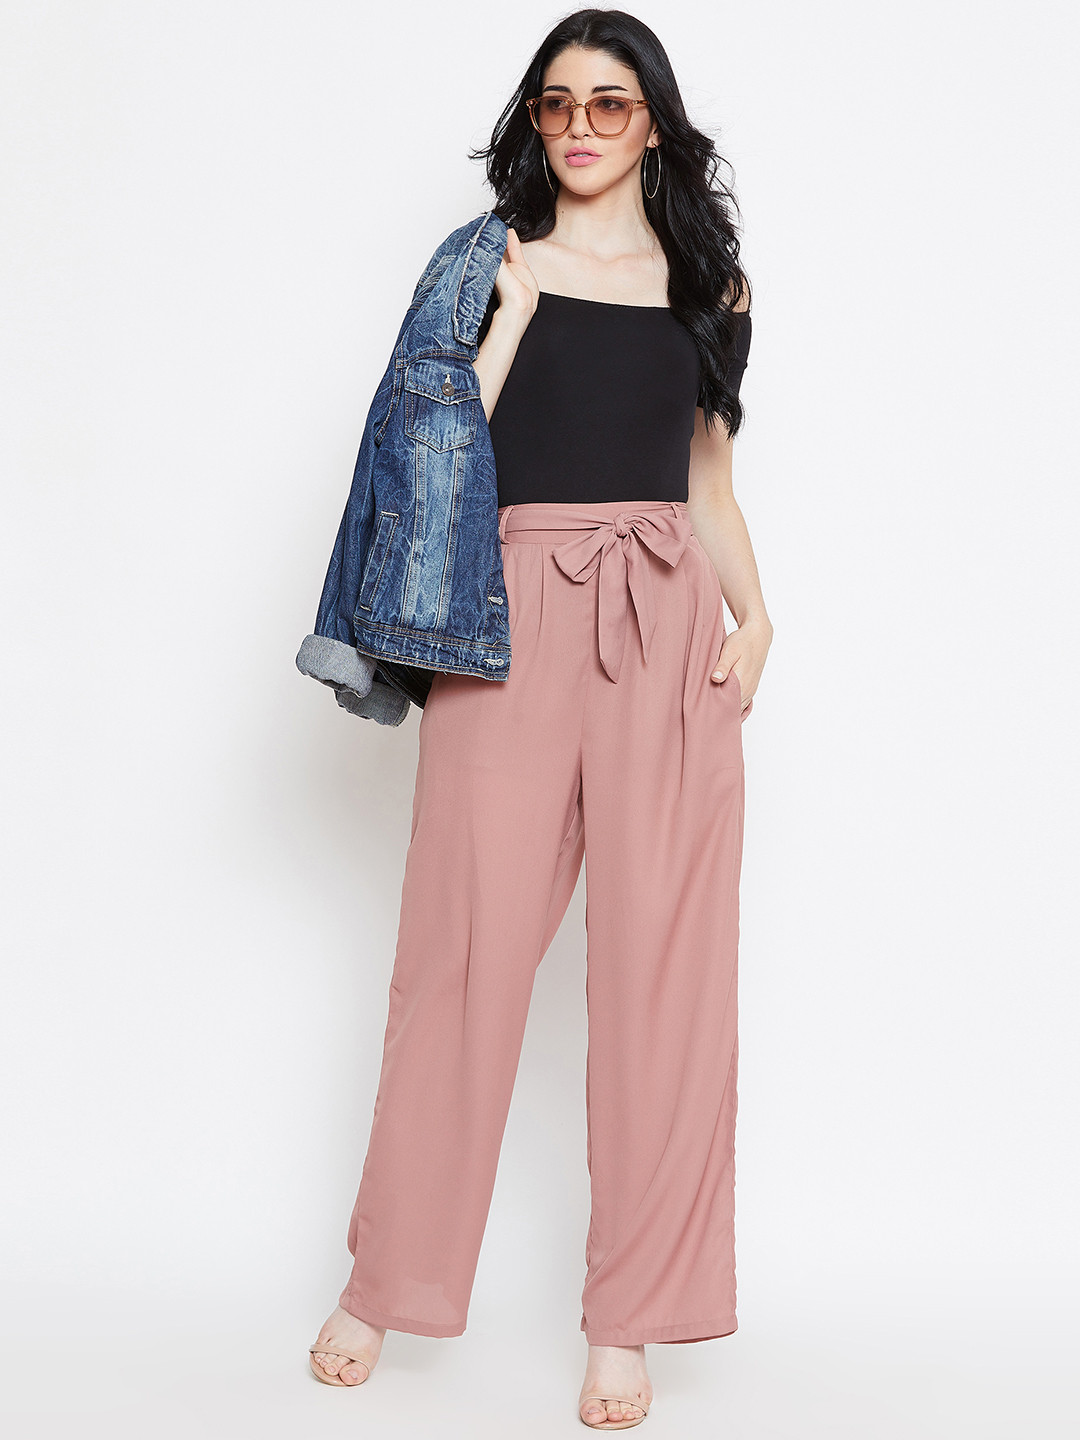 Torine Printed Front Waisted Tie Up Pants - APPAPOP